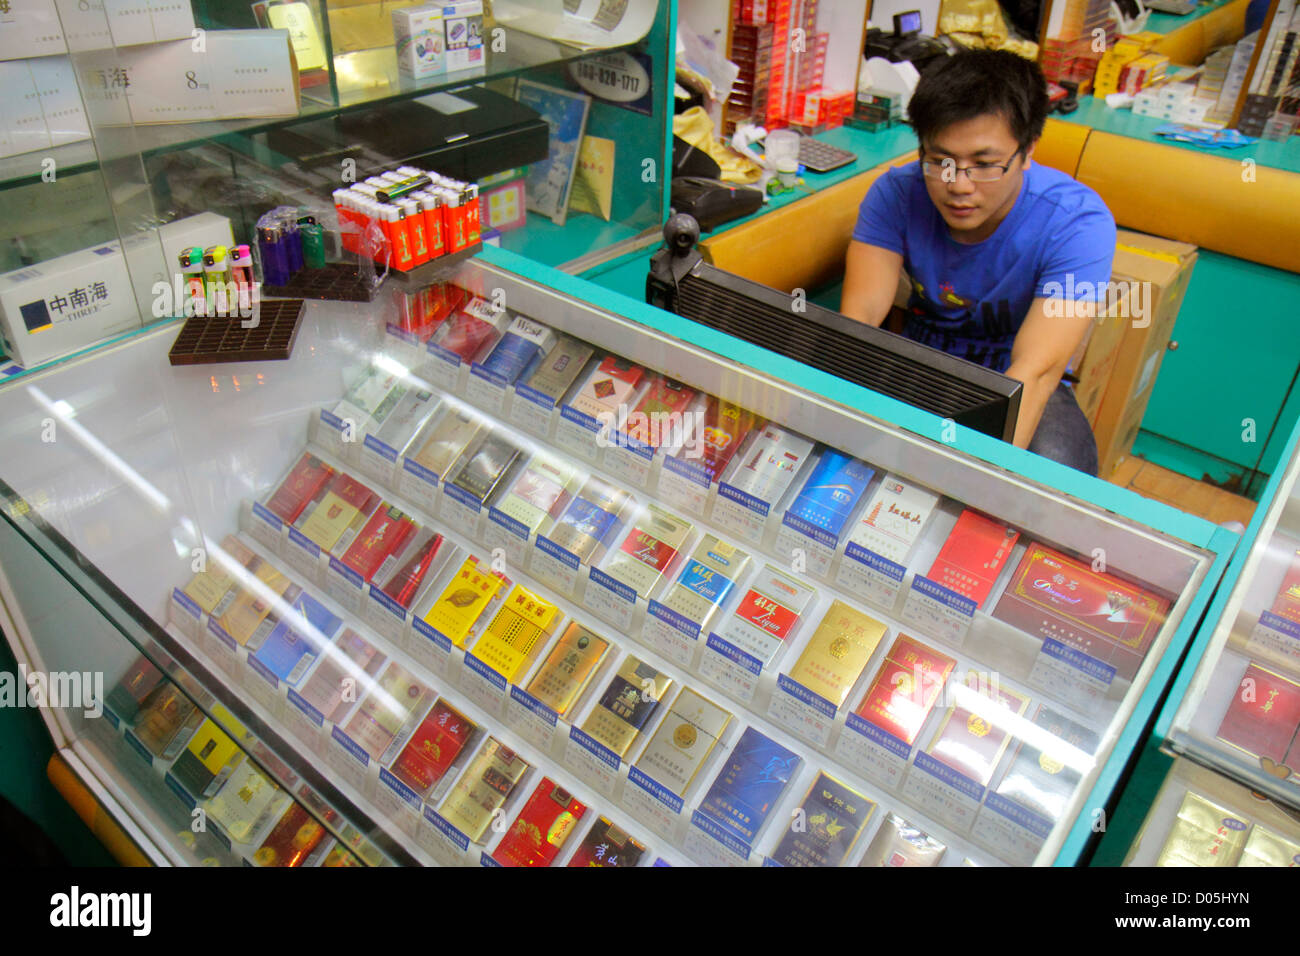 Shanghai China,Chinese Huangpu District,Sichuan Road,tobacco smoke shop,cigarettes,domestic,pack,display case sale,Asian man men male adult adults,cle Stock Photo